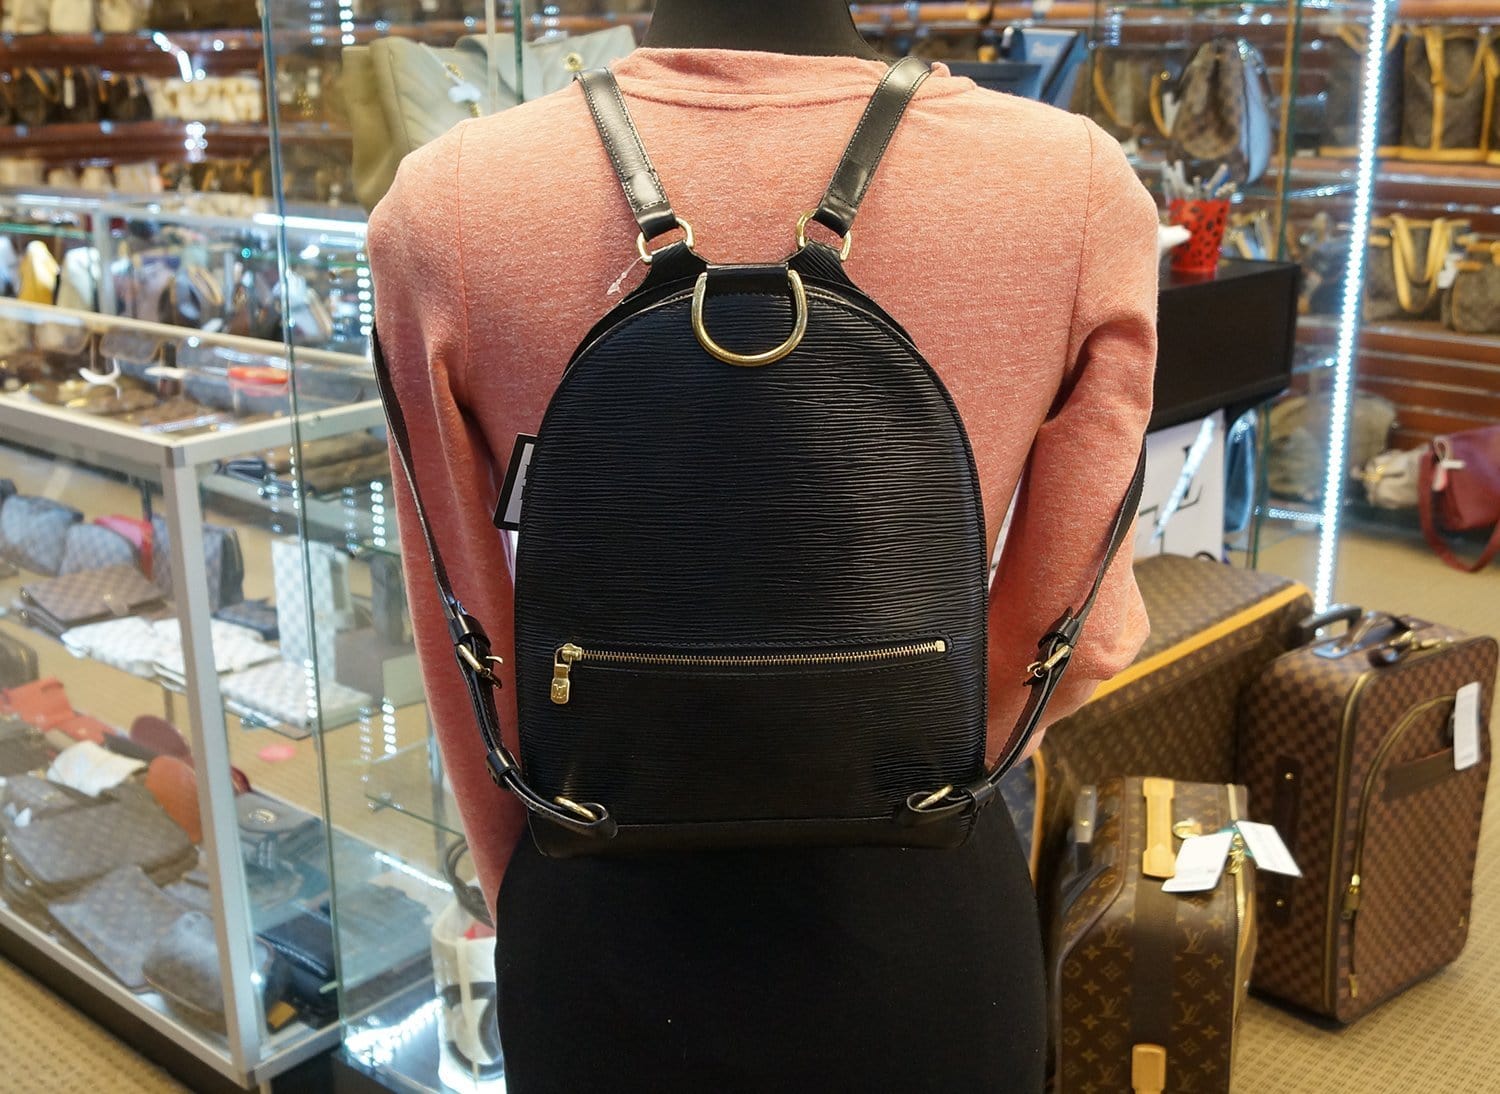 Louis Vuitton Epi Leather Backpack on SALE